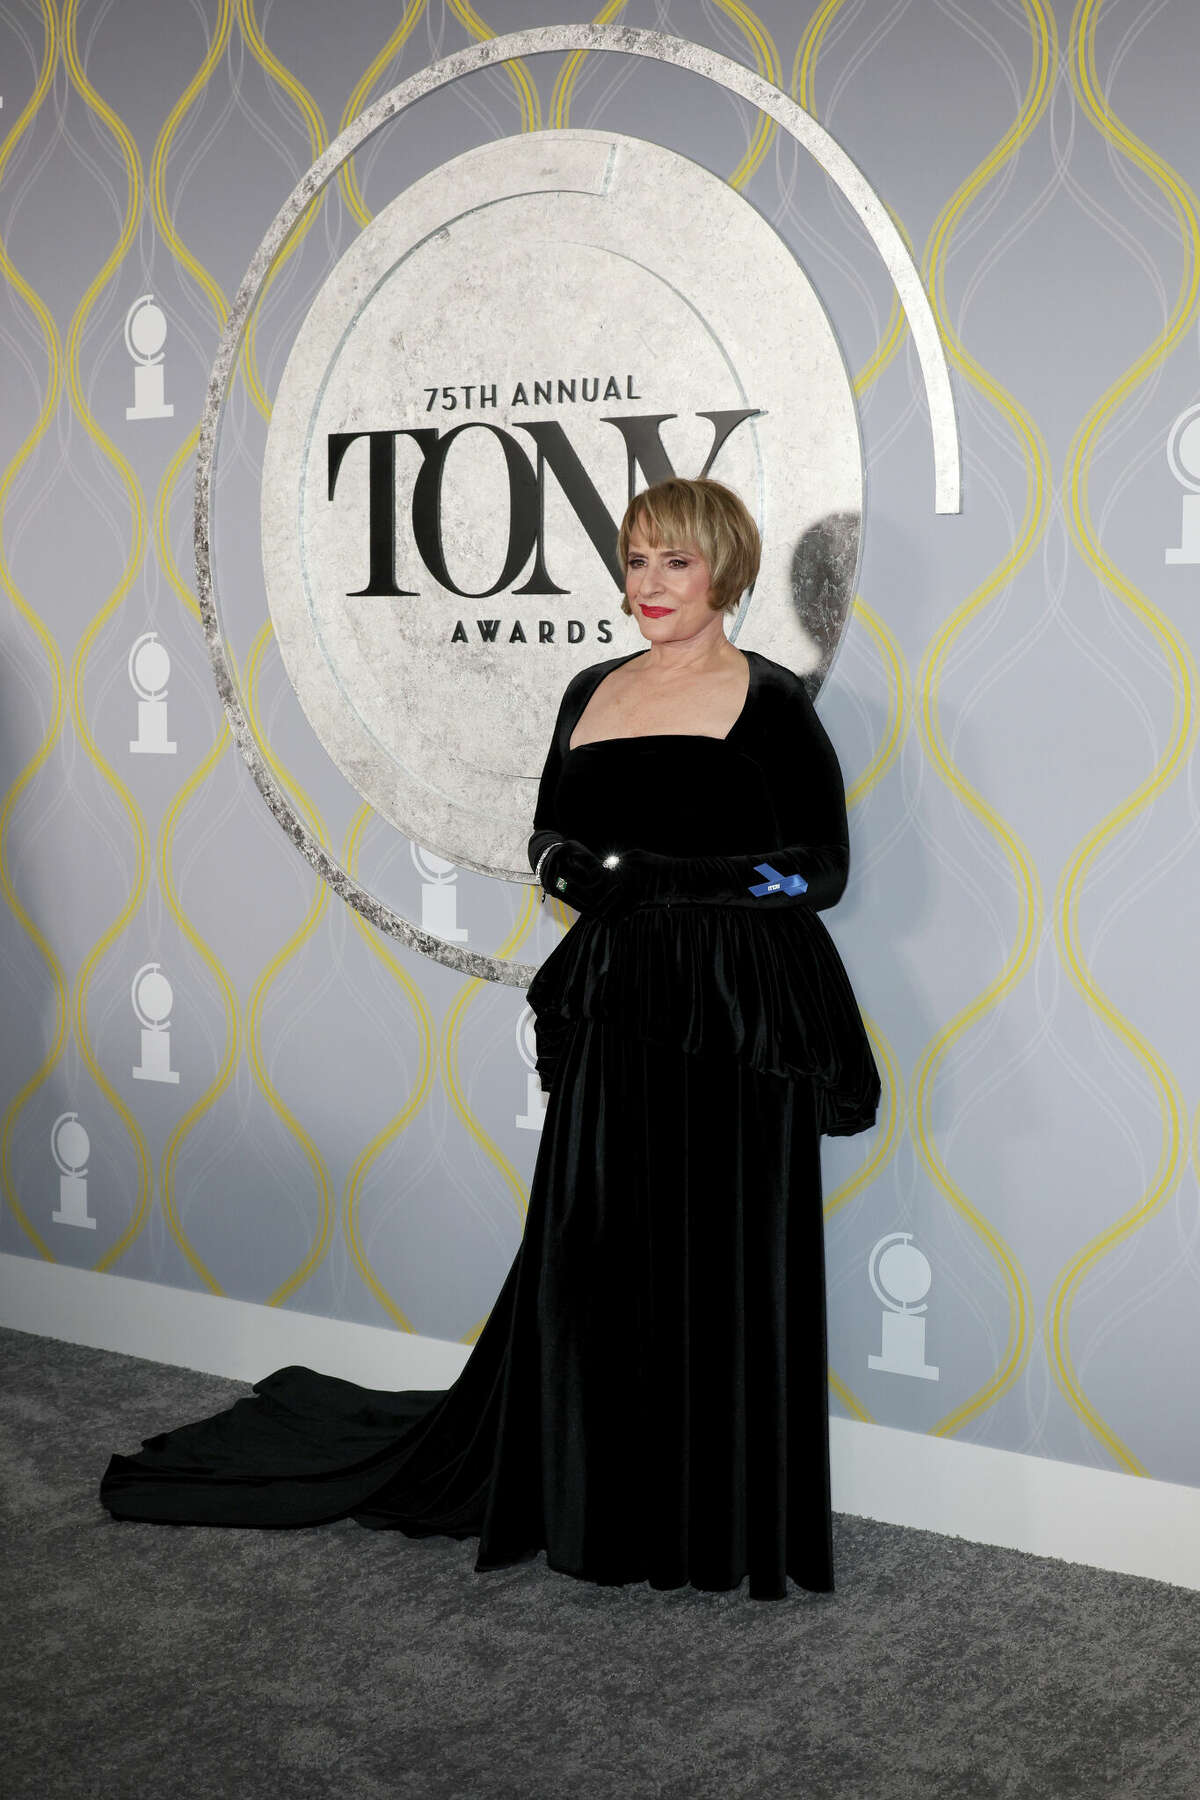 NEW YORK, NEW YORK - JUNE 12: Patti LuPone attends the 75th Annual Tony Awards at Radio City Music Hall on June 12, 2022 in New York City. (Photo by Dia Dipasupil/Getty Images)